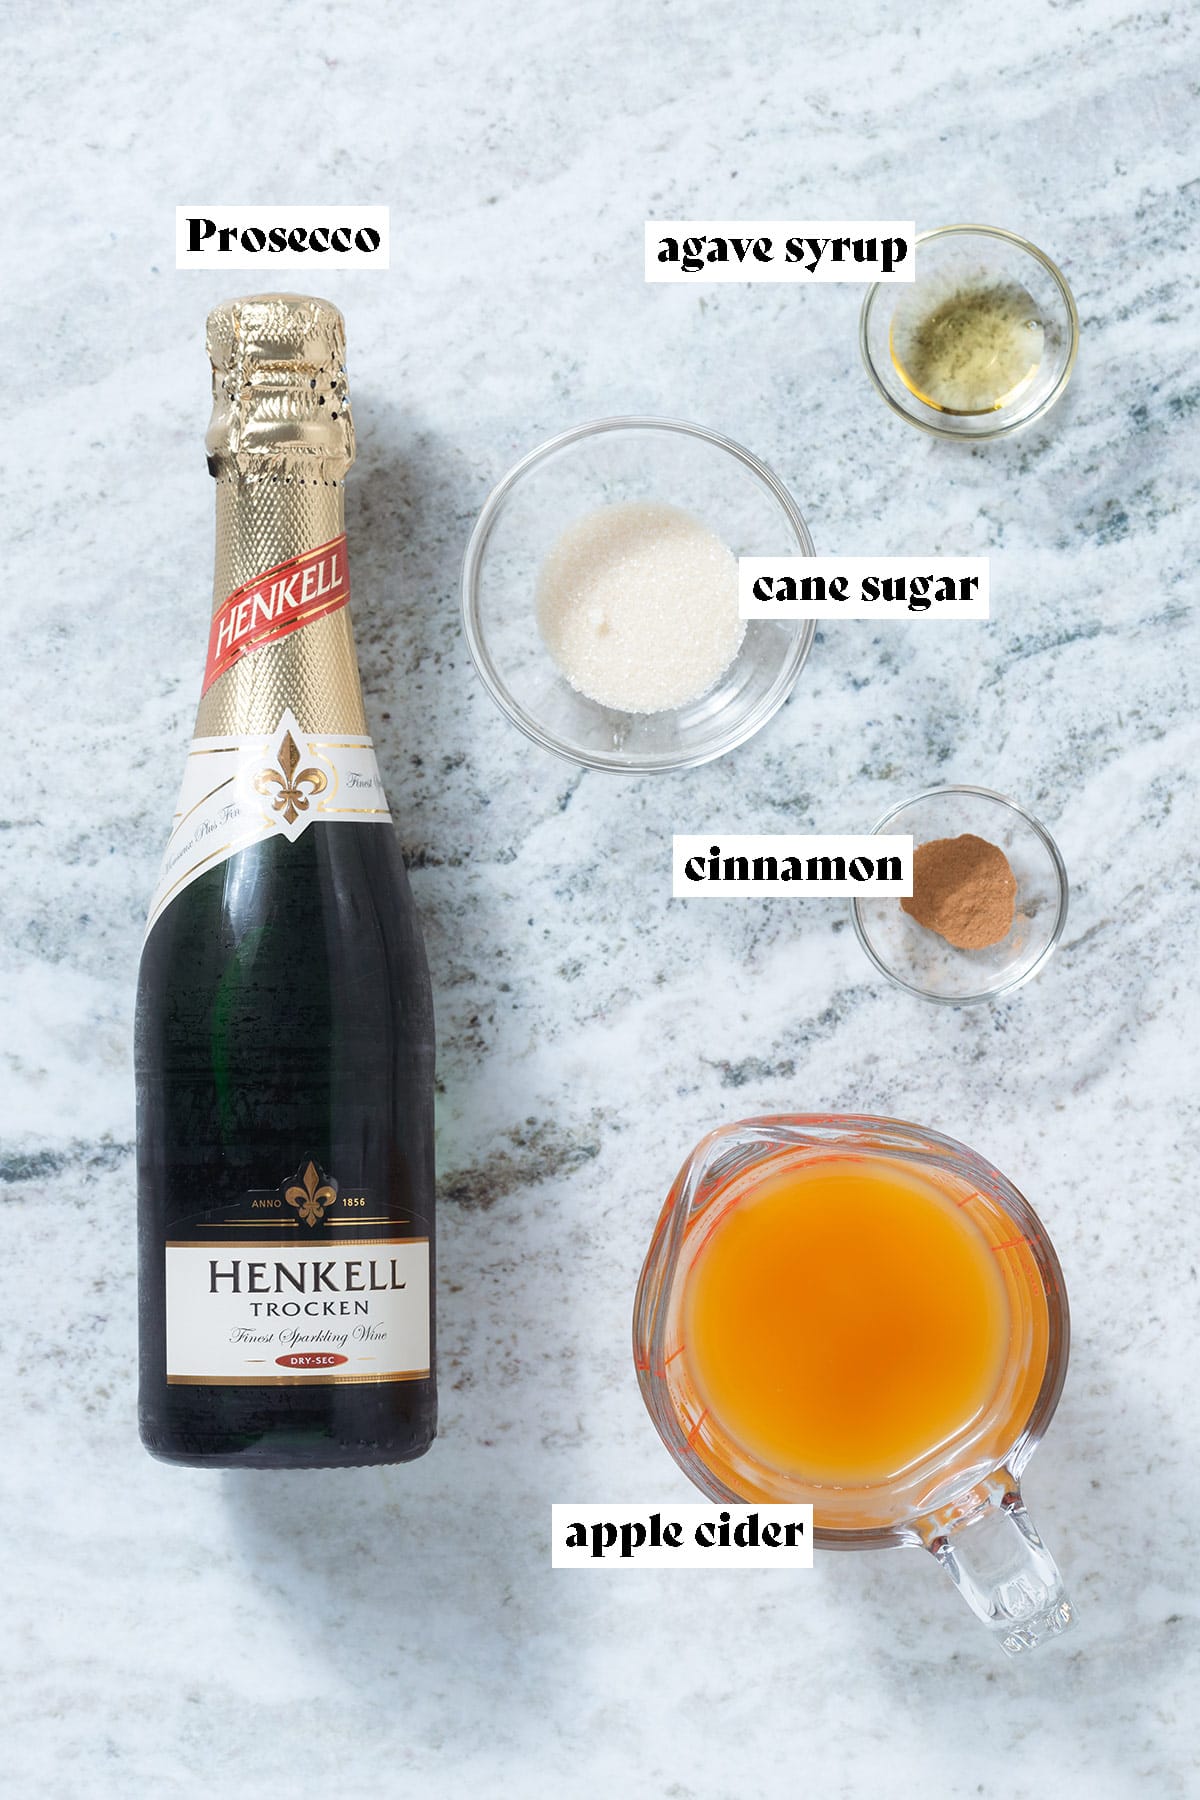 A bottle of prosecco, apple cider, and other mimosa ingredients laid out on a grey stone background with text overlay.